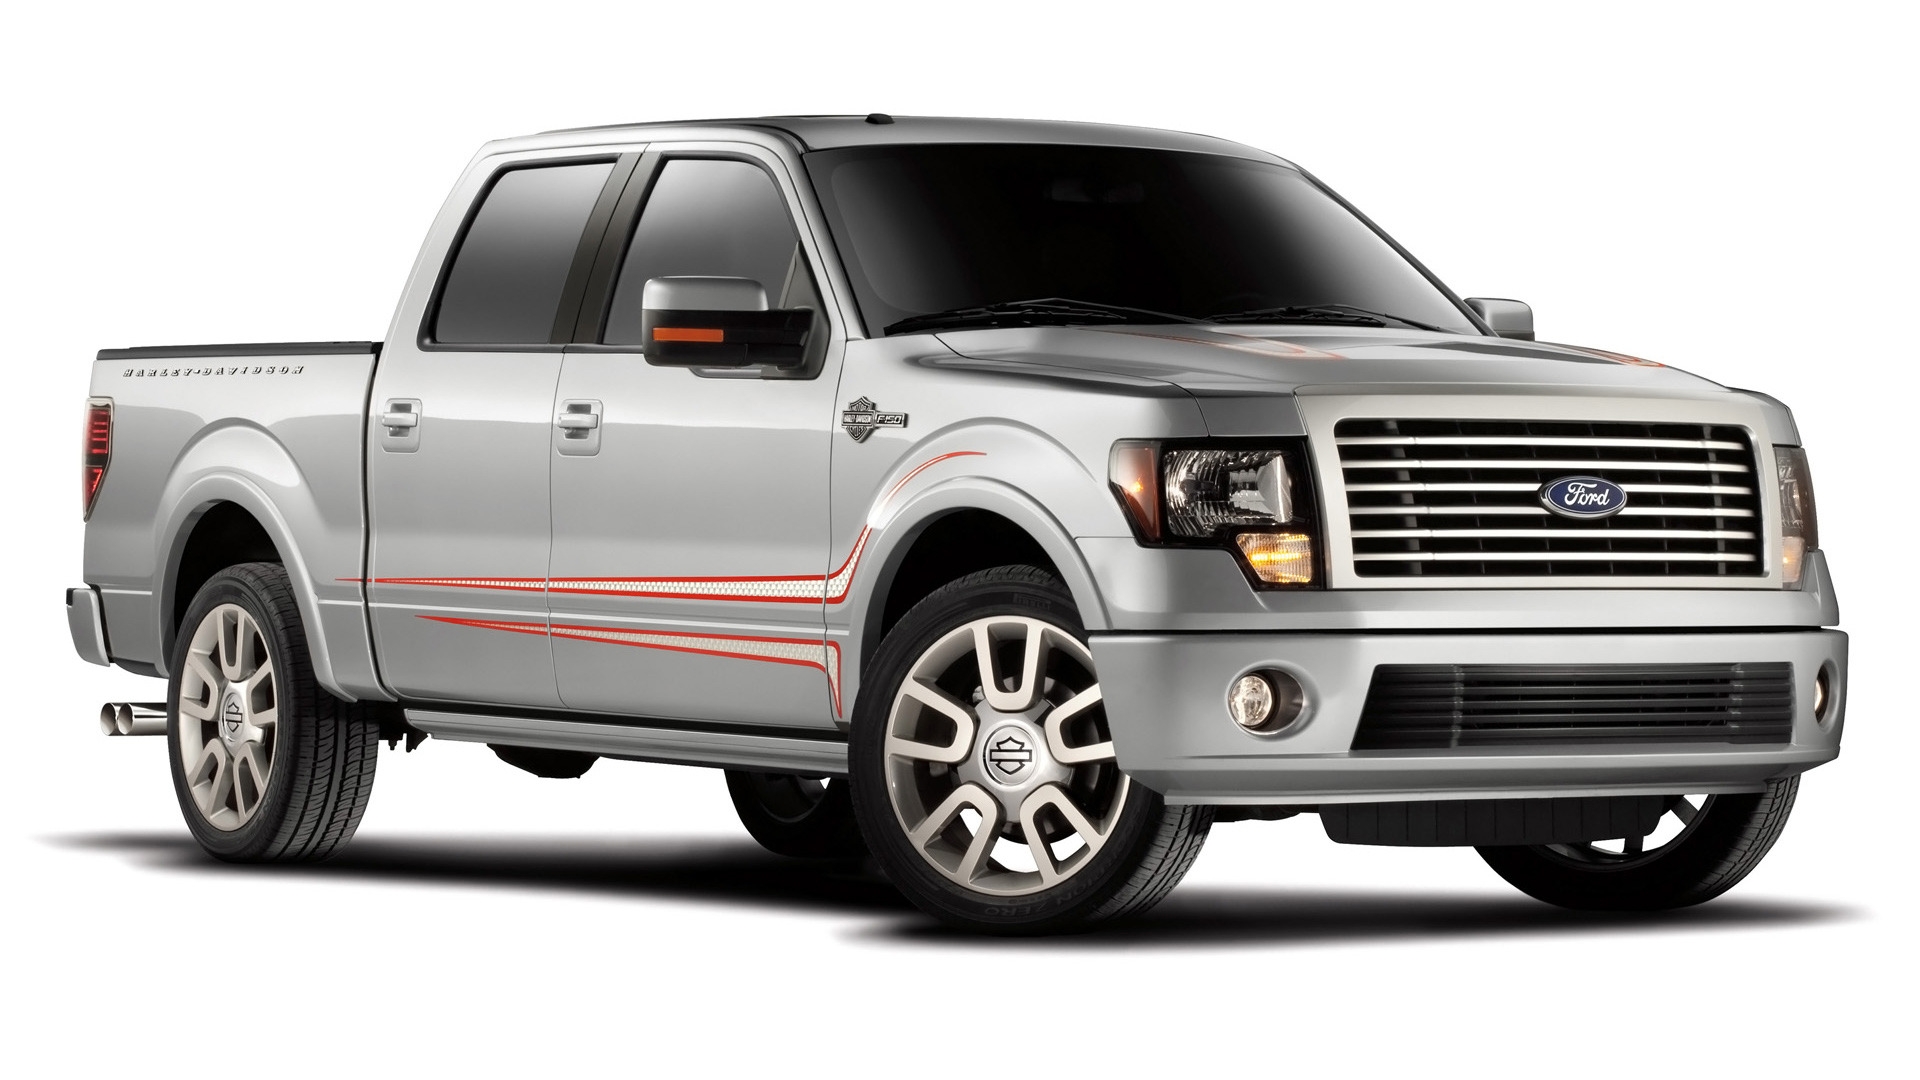 Ford Harley Davidson F 150 Side Angle for 1920 x 1080 HDTV 1080p resolution